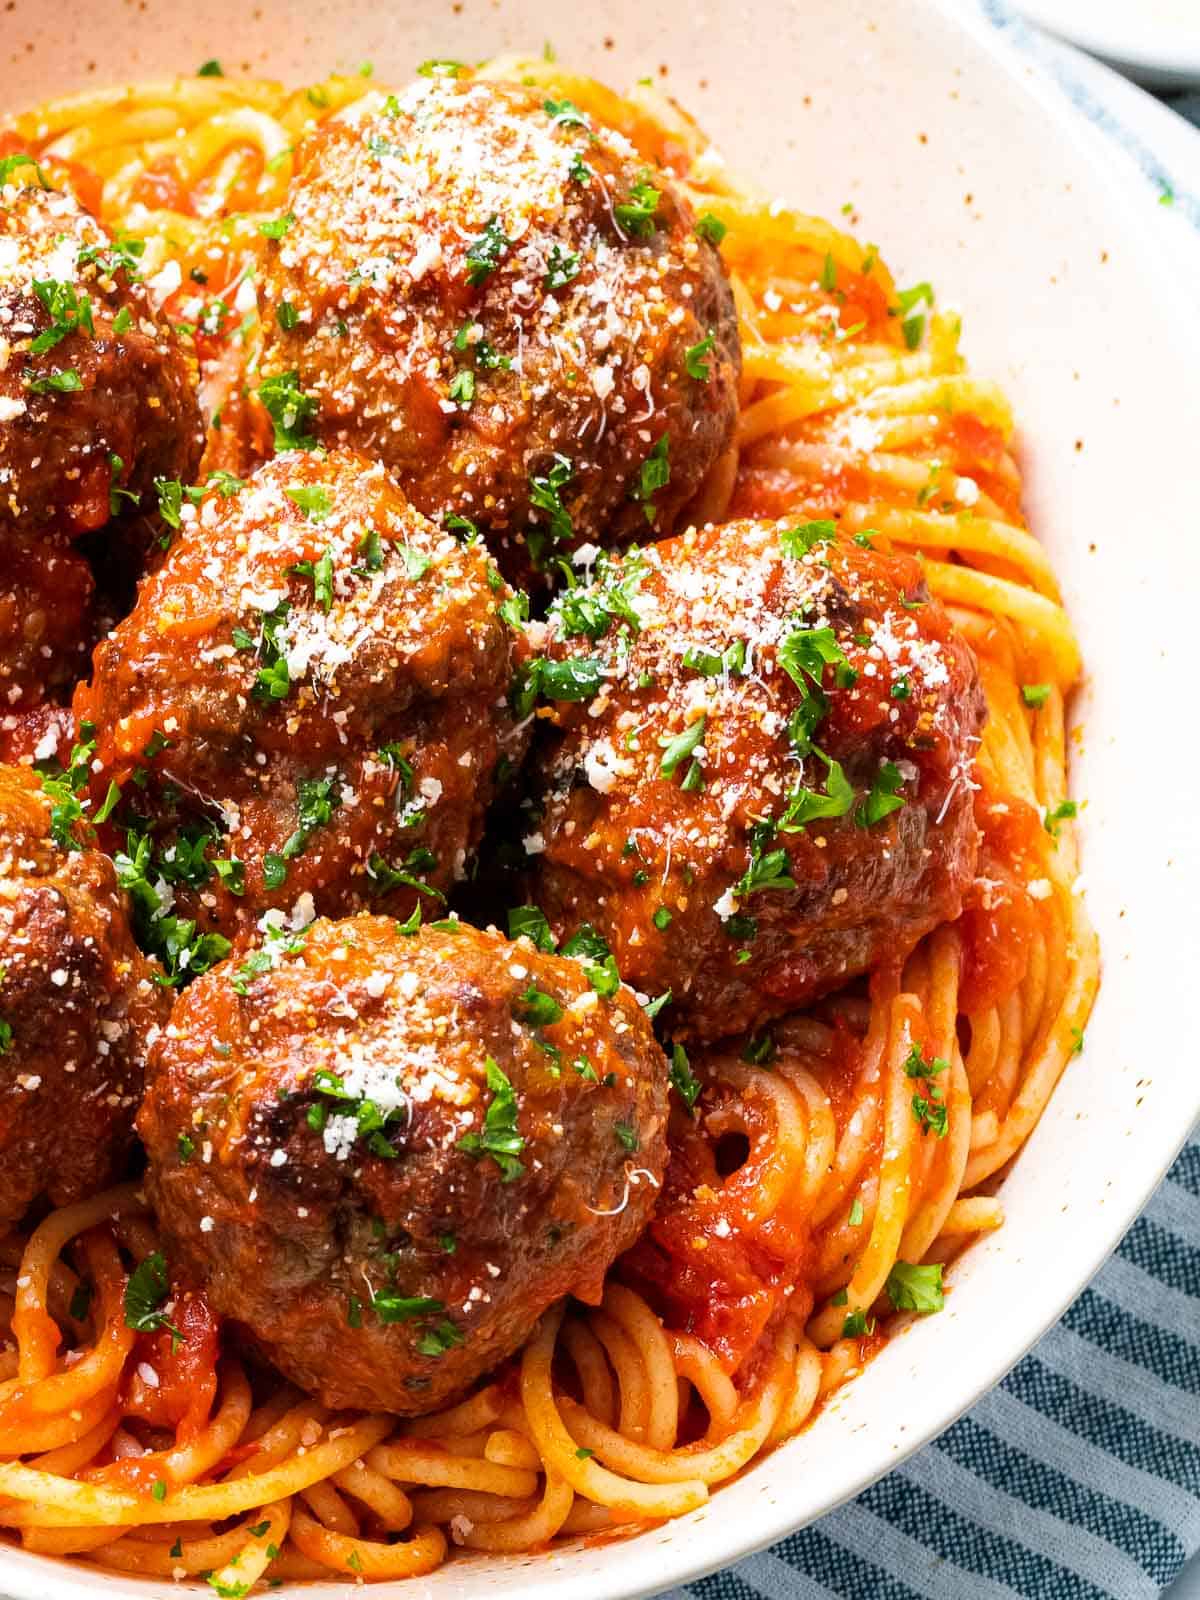 Juicy, melt in your mouth Italian meatballs with spaghetti.